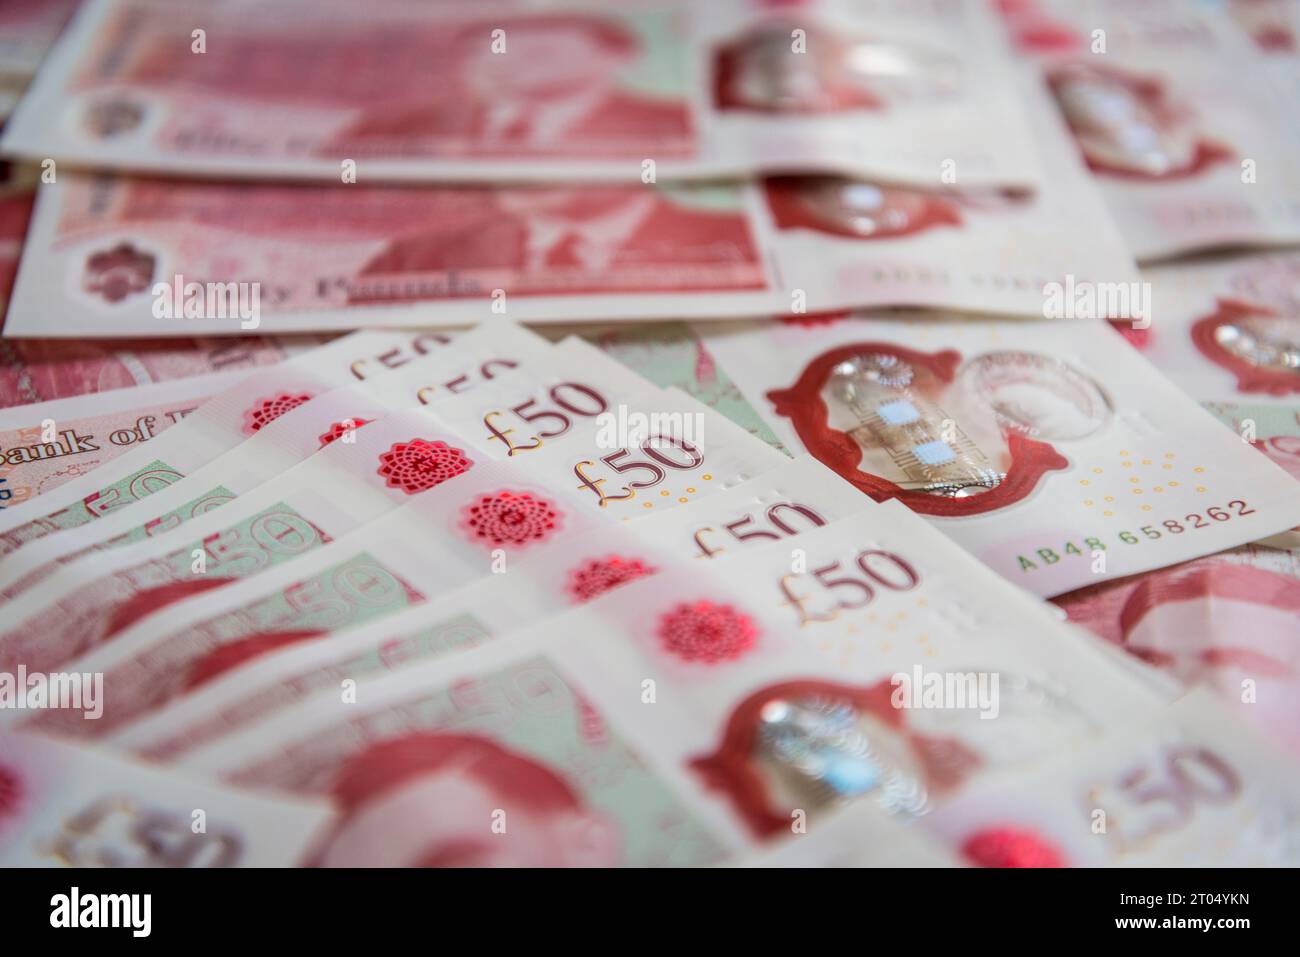 Pound sterling banknotes Stock Photo